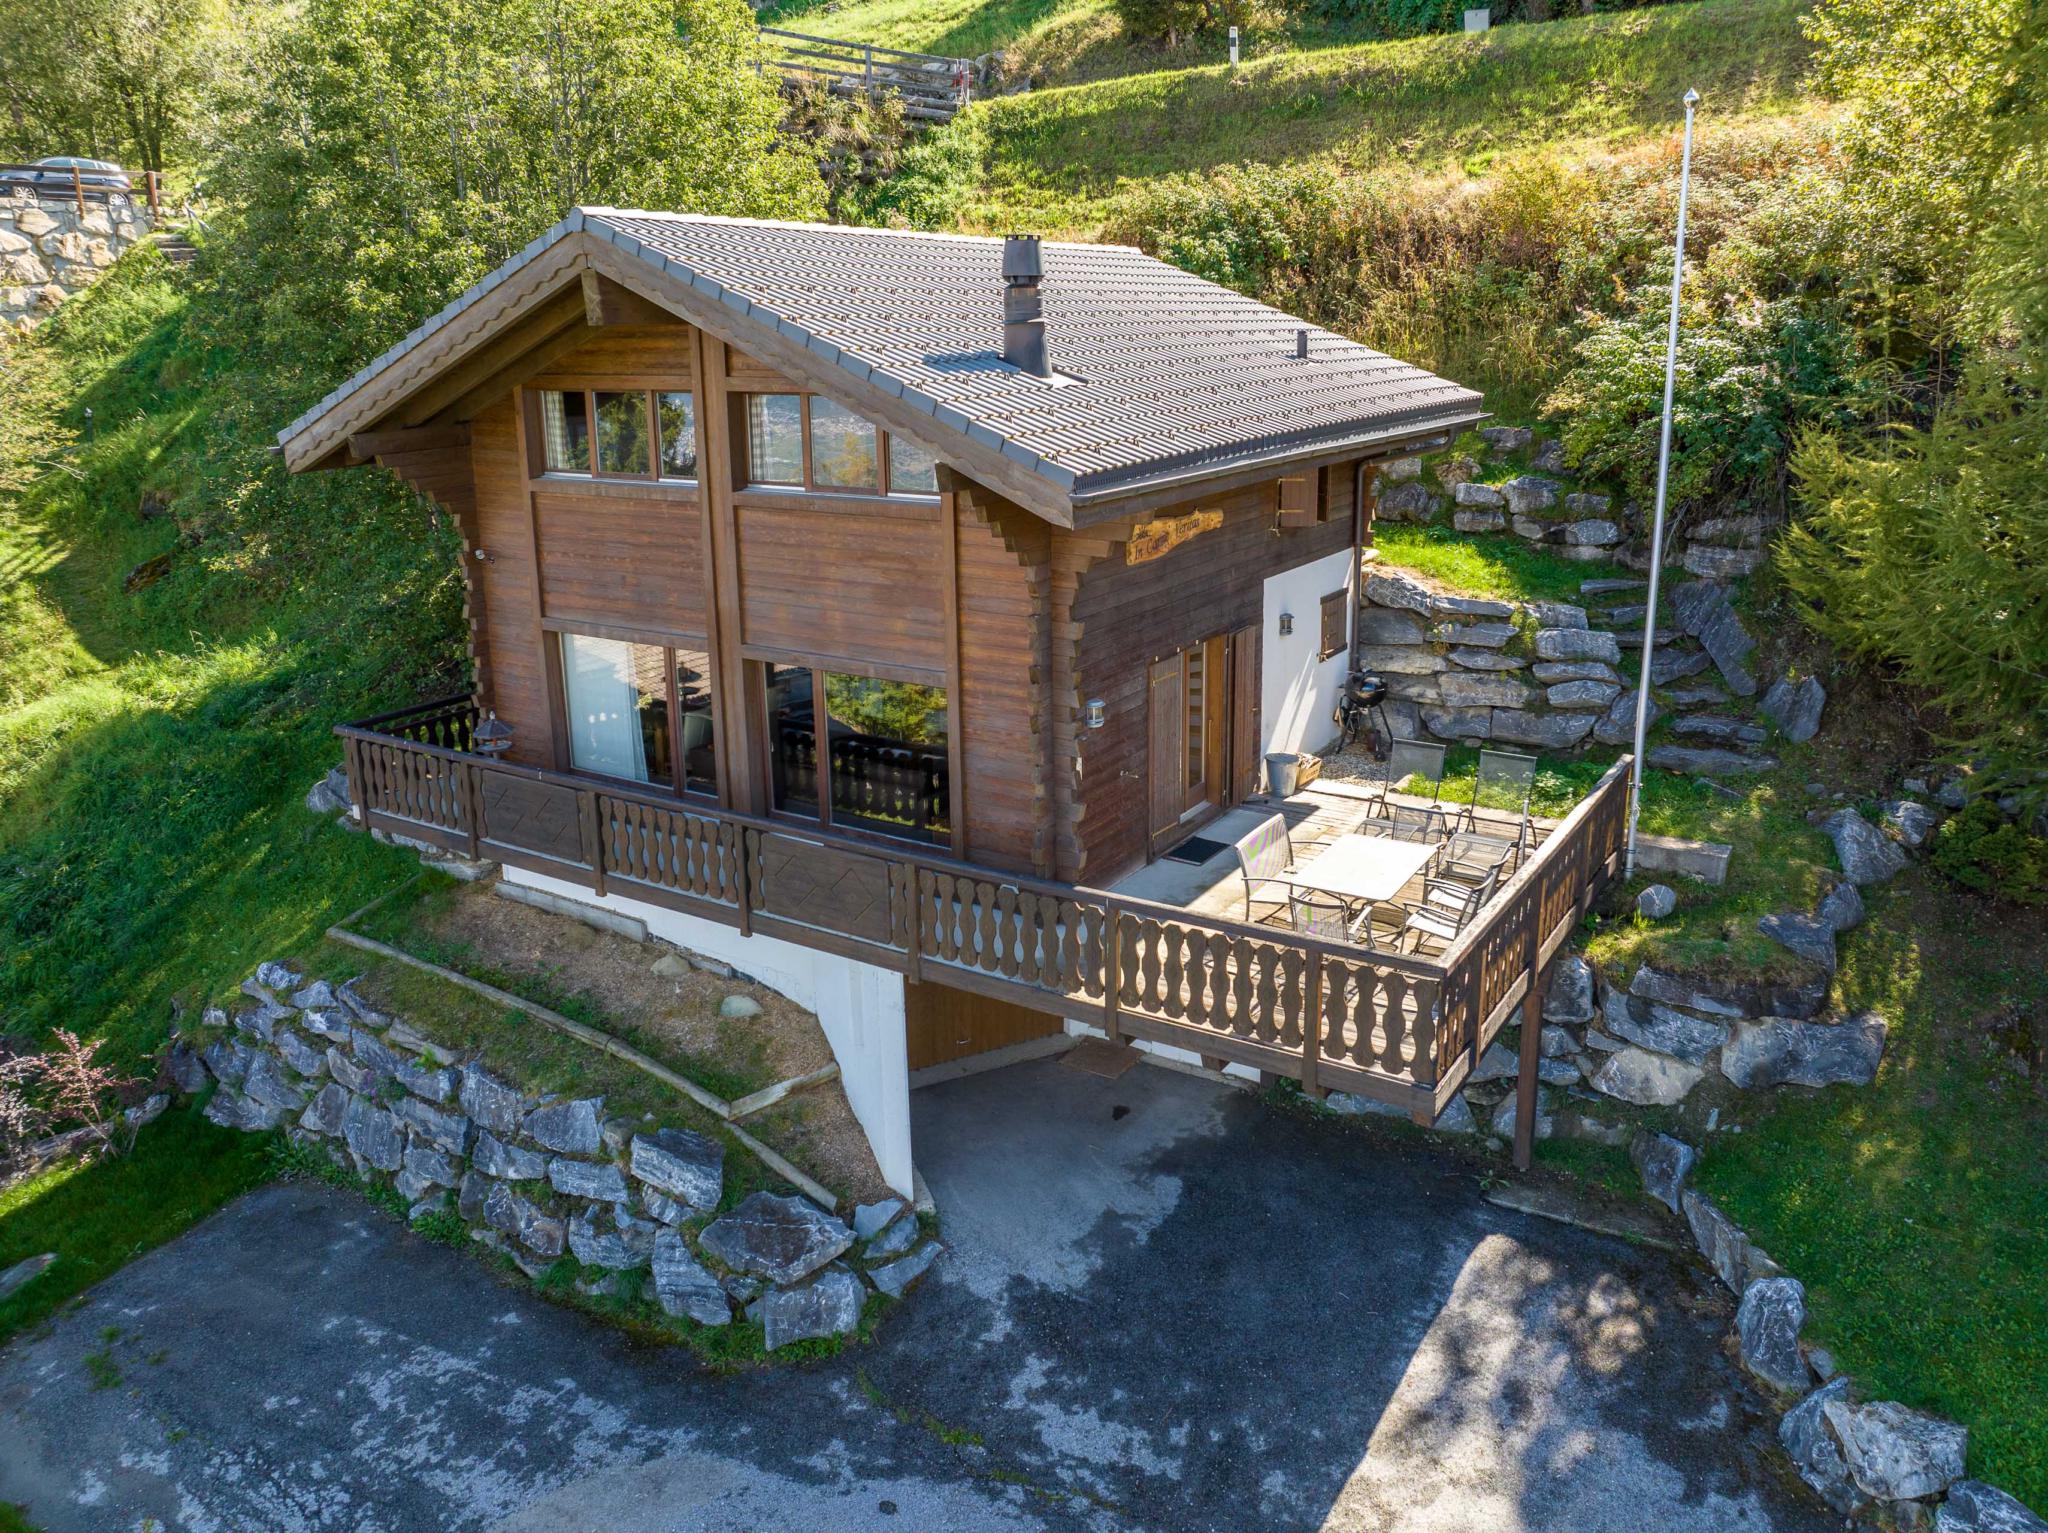 Superb, peaceful chalet with panoramic views